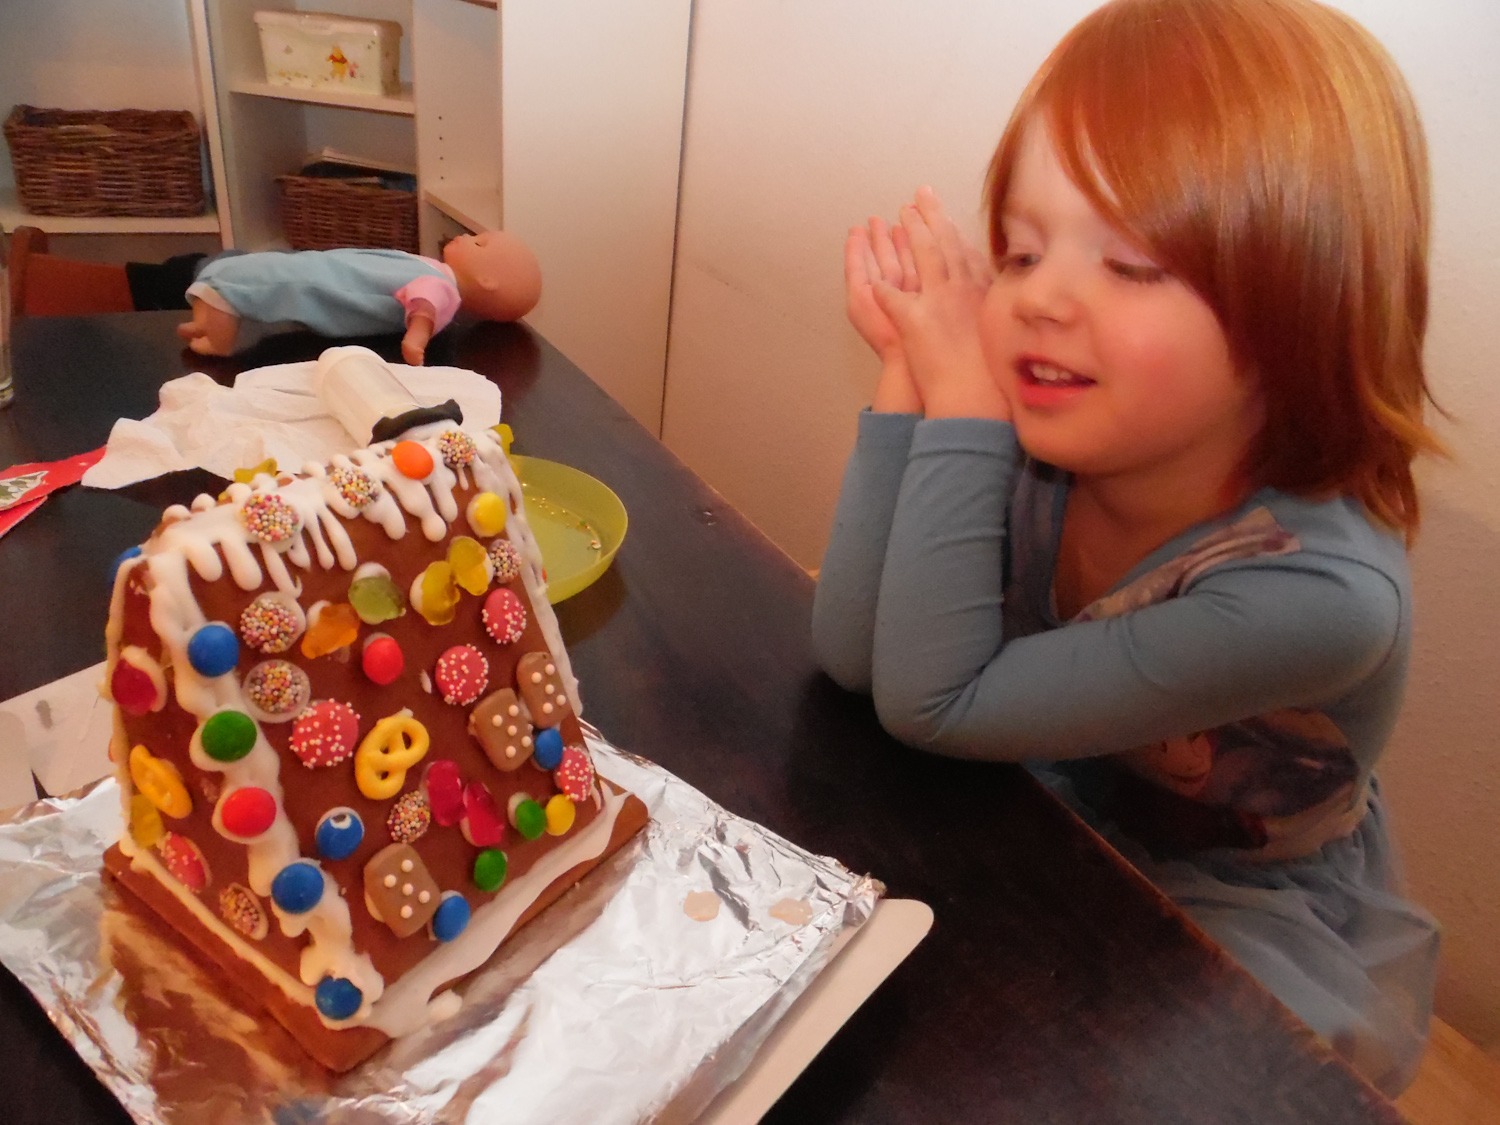 Gingerbread house project with Grandma